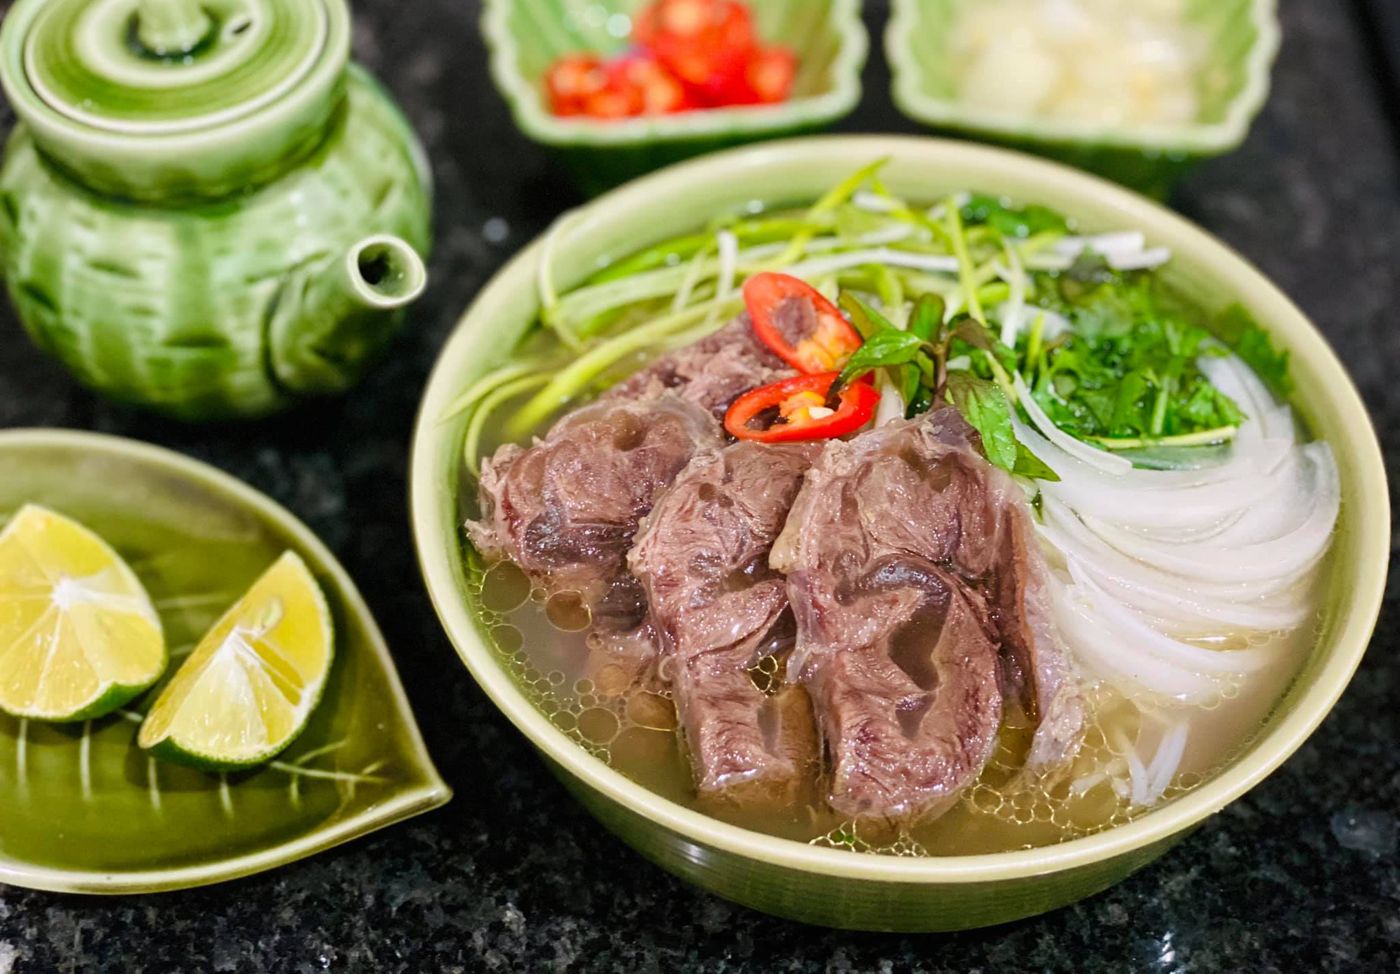 5 Must-try Michelin-recommended dishes in Vietnam